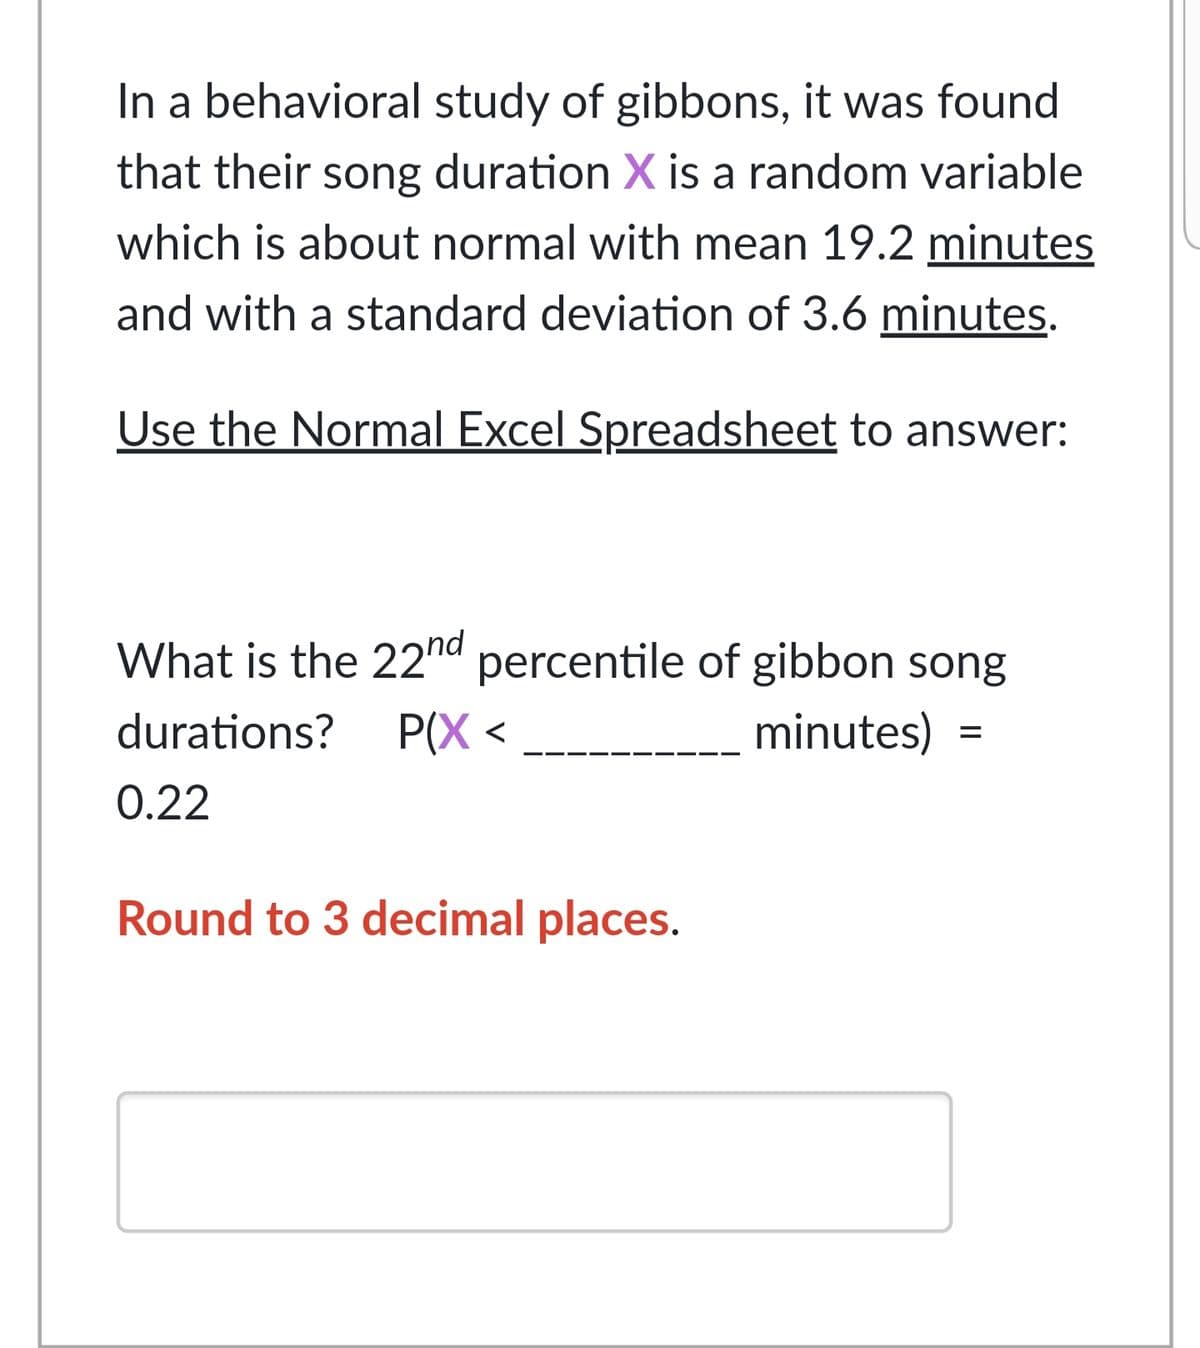 In a behavioral study of gibbons, it was found
that their song duration X is a random variable
which is about normal with mean 19.2 minutes
and with a standard deviation of 3.6 minutes.
Use the Normal Excel Spreadsheet to answer:
What is the 22nd percentile of gibbon song
durations?
P(X <
minutes)
0.22
Round to 3 decimal places.
